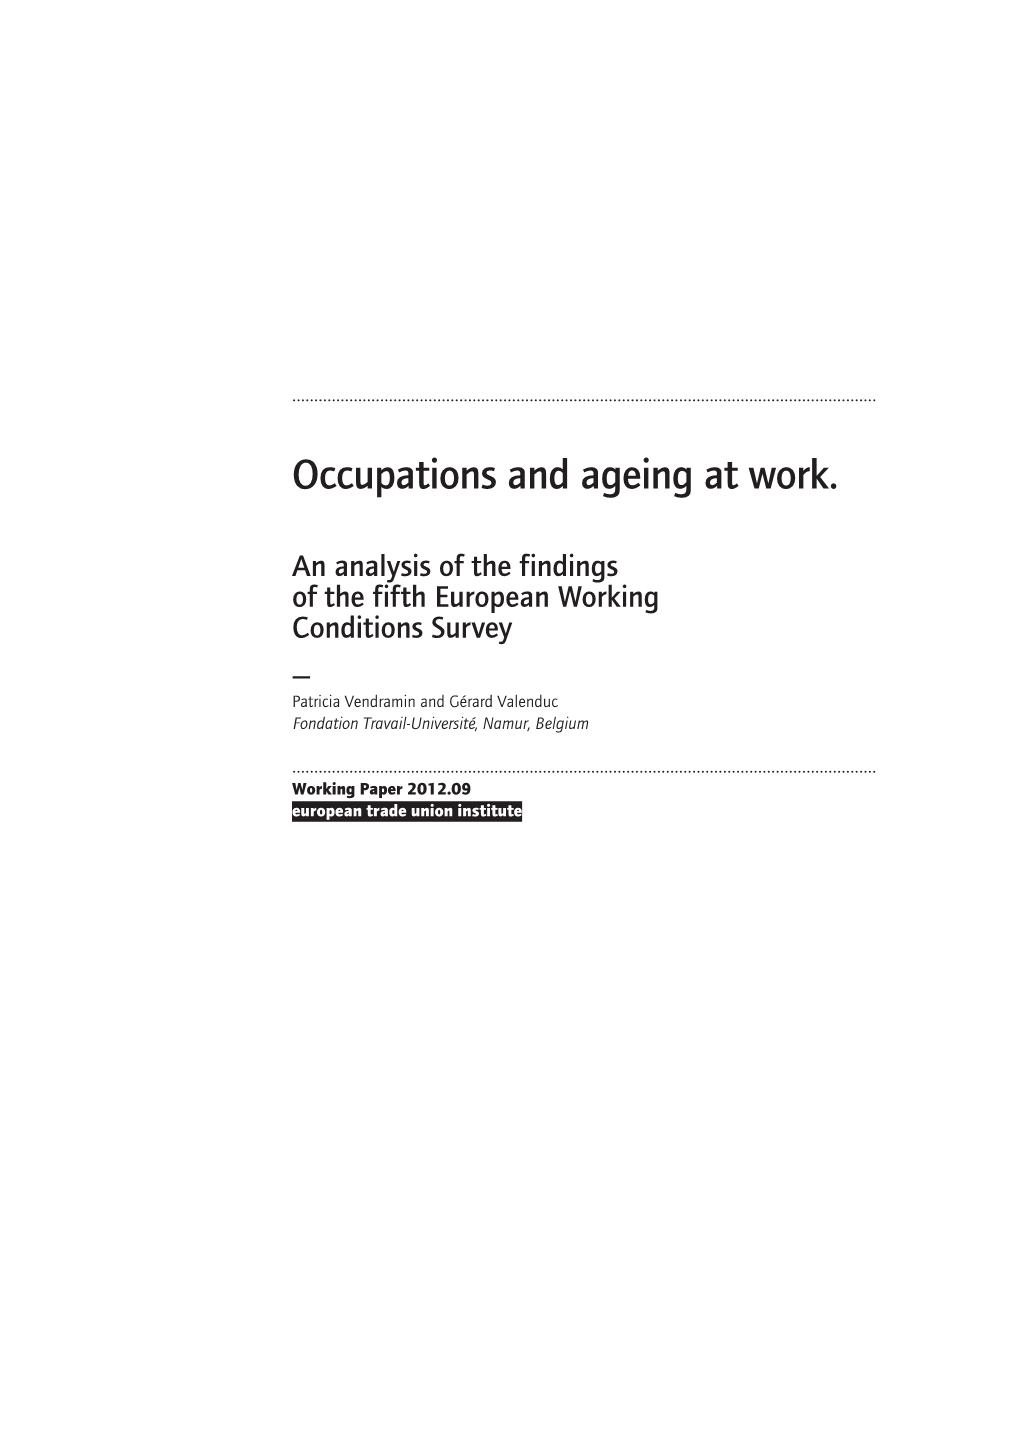 Occupations and Ageing at Work